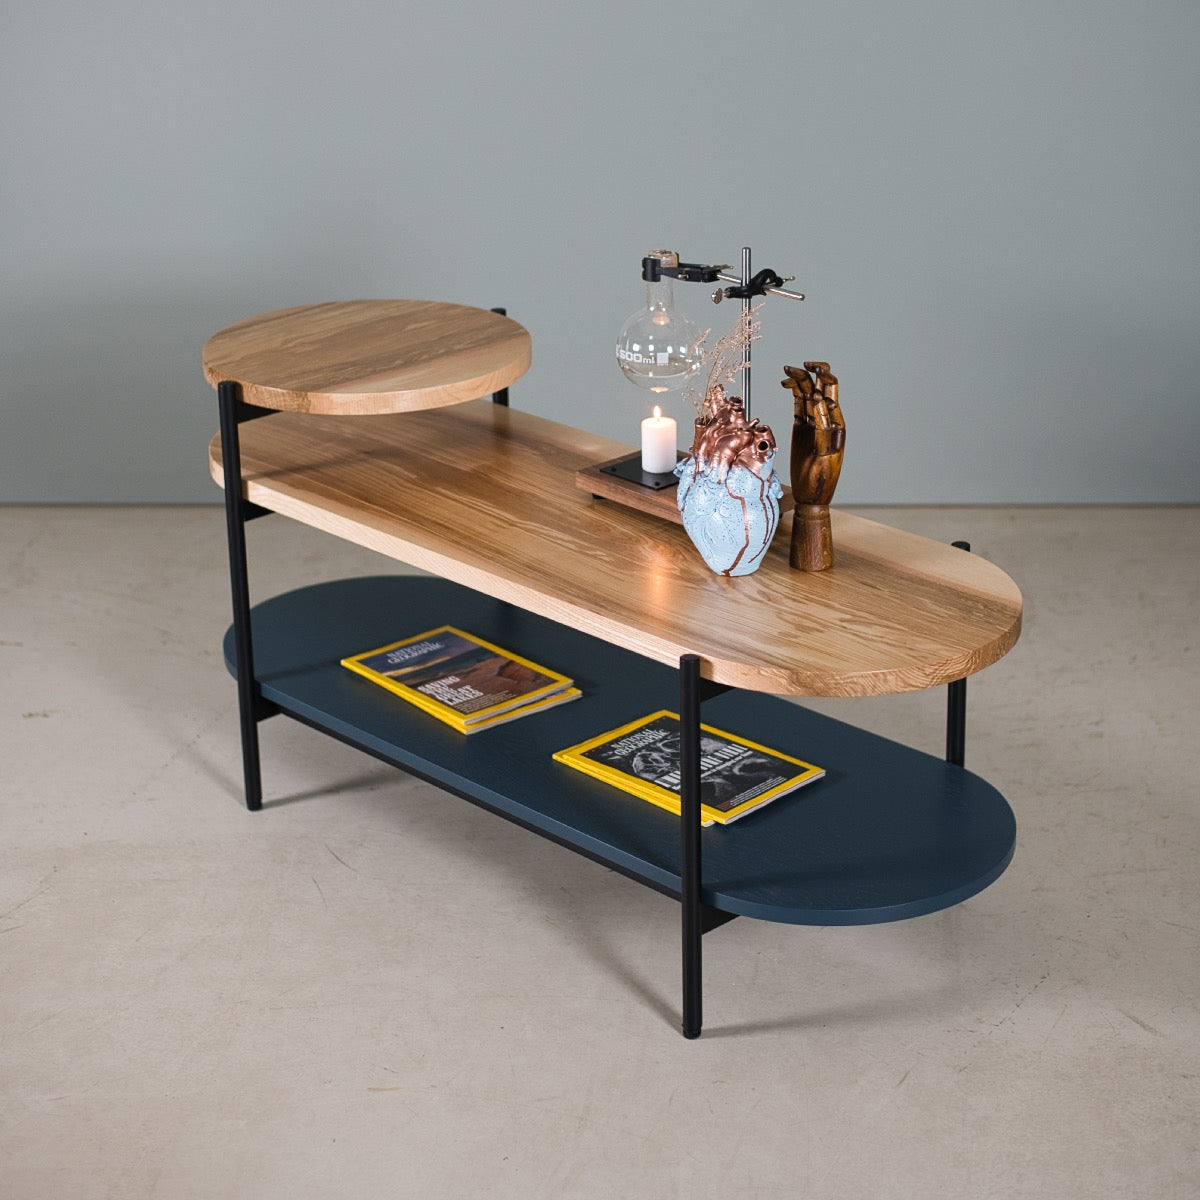 An image of the Coffee Table, Level product available from Koda Studios